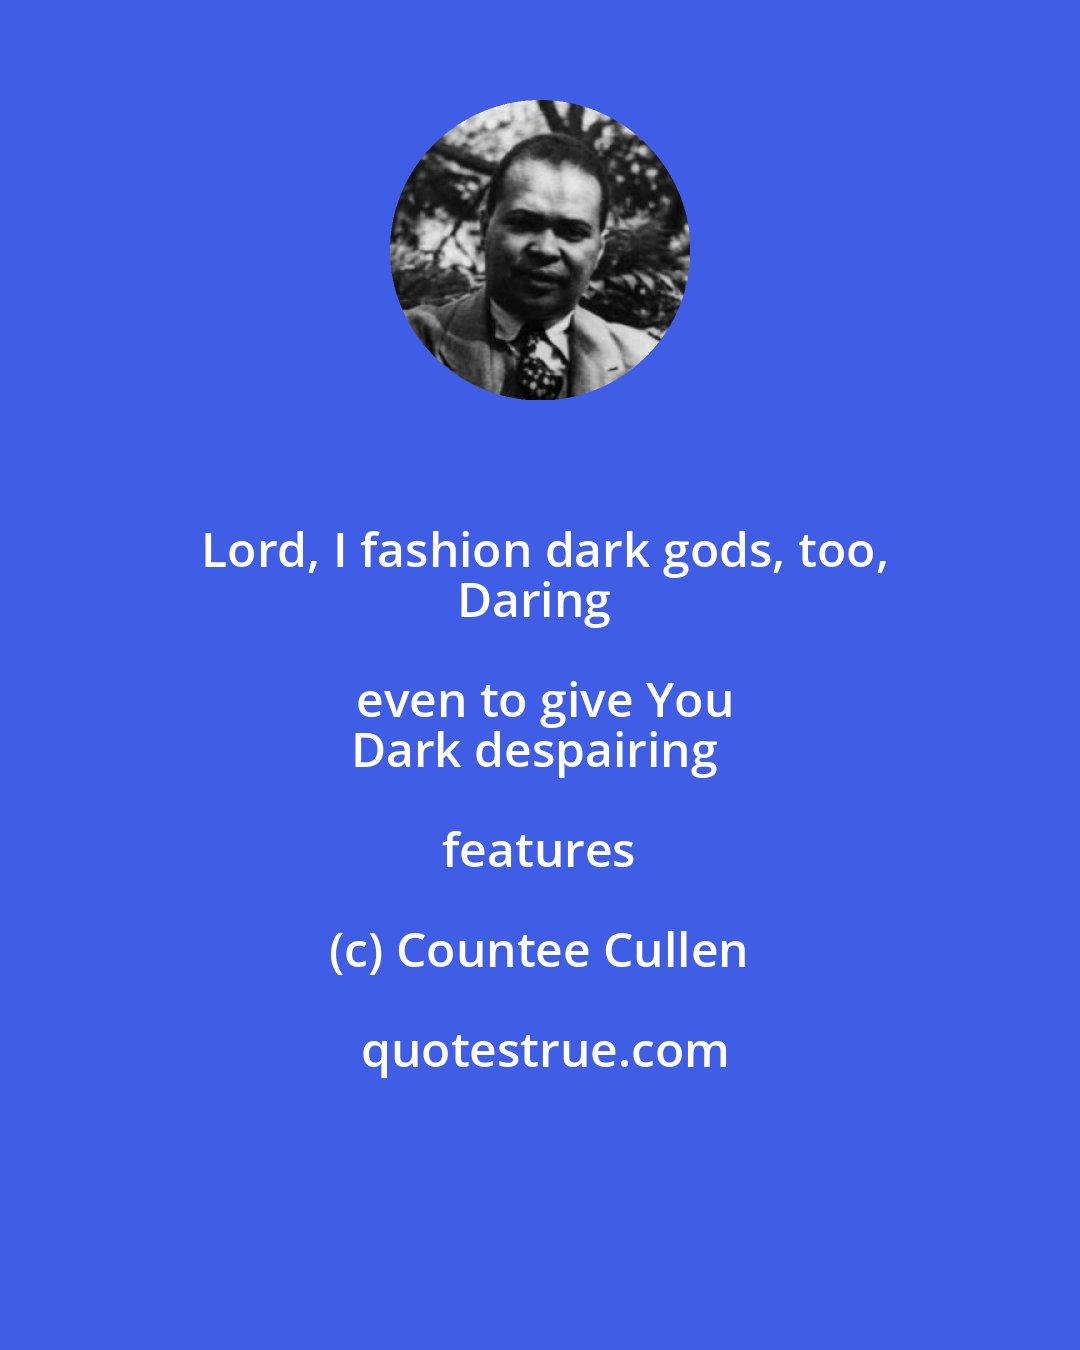 Countee Cullen: Lord, I fashion dark gods, too,
Daring even to give You
Dark despairing features